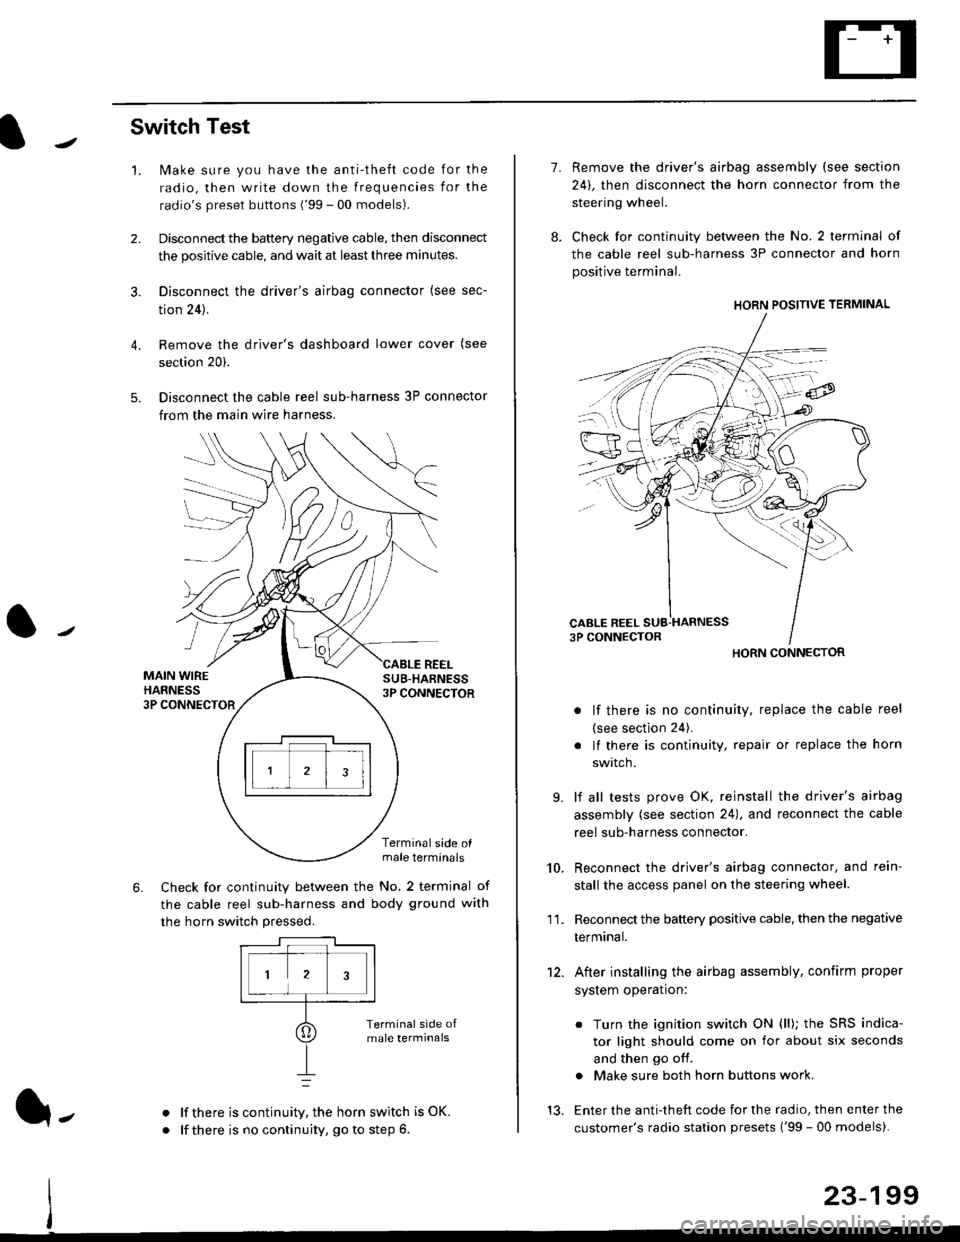 HONDA CIVIC 2000 6.G Workshop Manual Switch Test
lMake sure you have the anti-theft code for the
radio, then write down the frequencies for the
radios preset buttons (99 - 00 models).
Disconnect the battery negative cable, then disconn